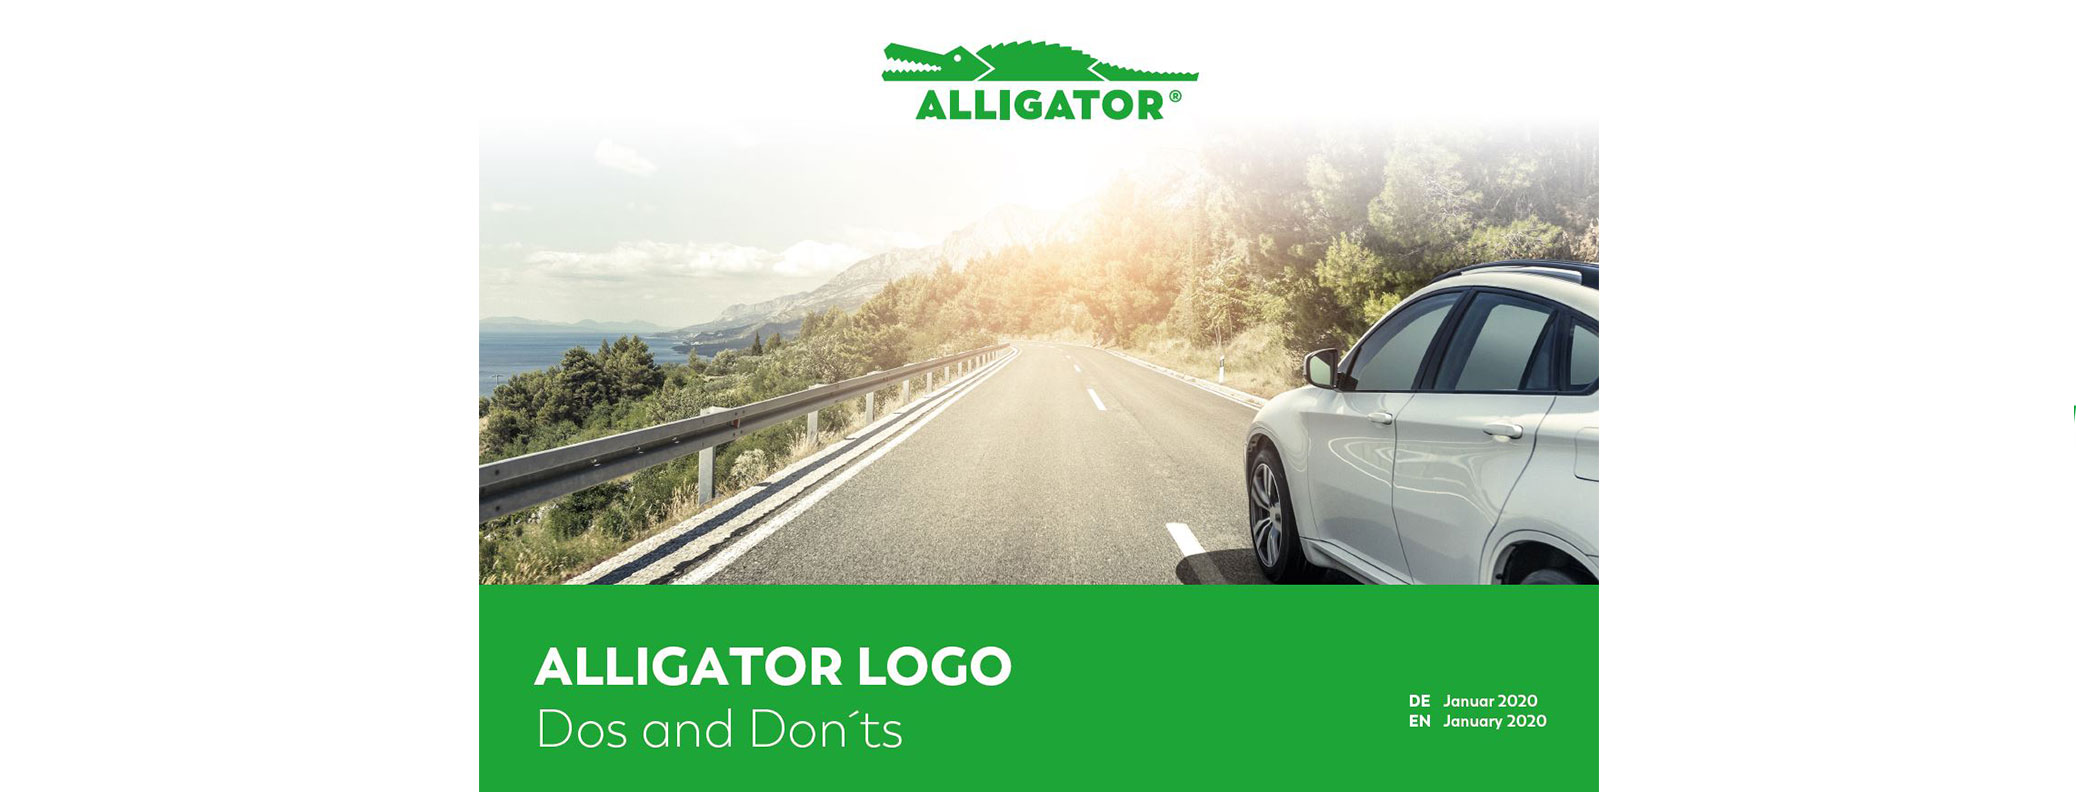 ALLIGATOR design and logo with car on country road in the background